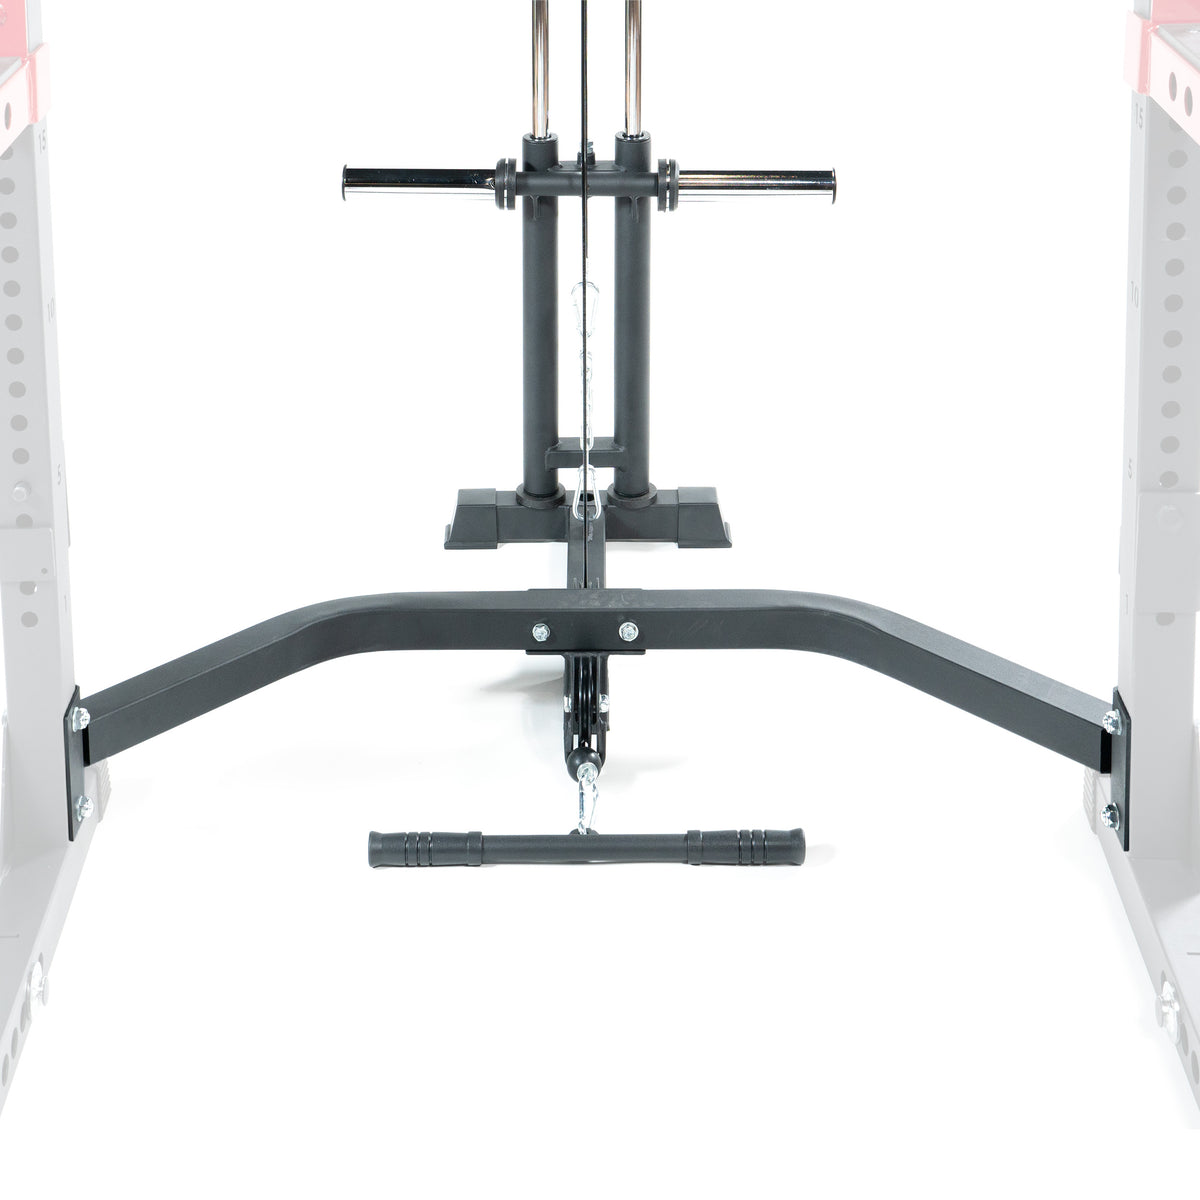 FitWay Power Cage Lat Attachment